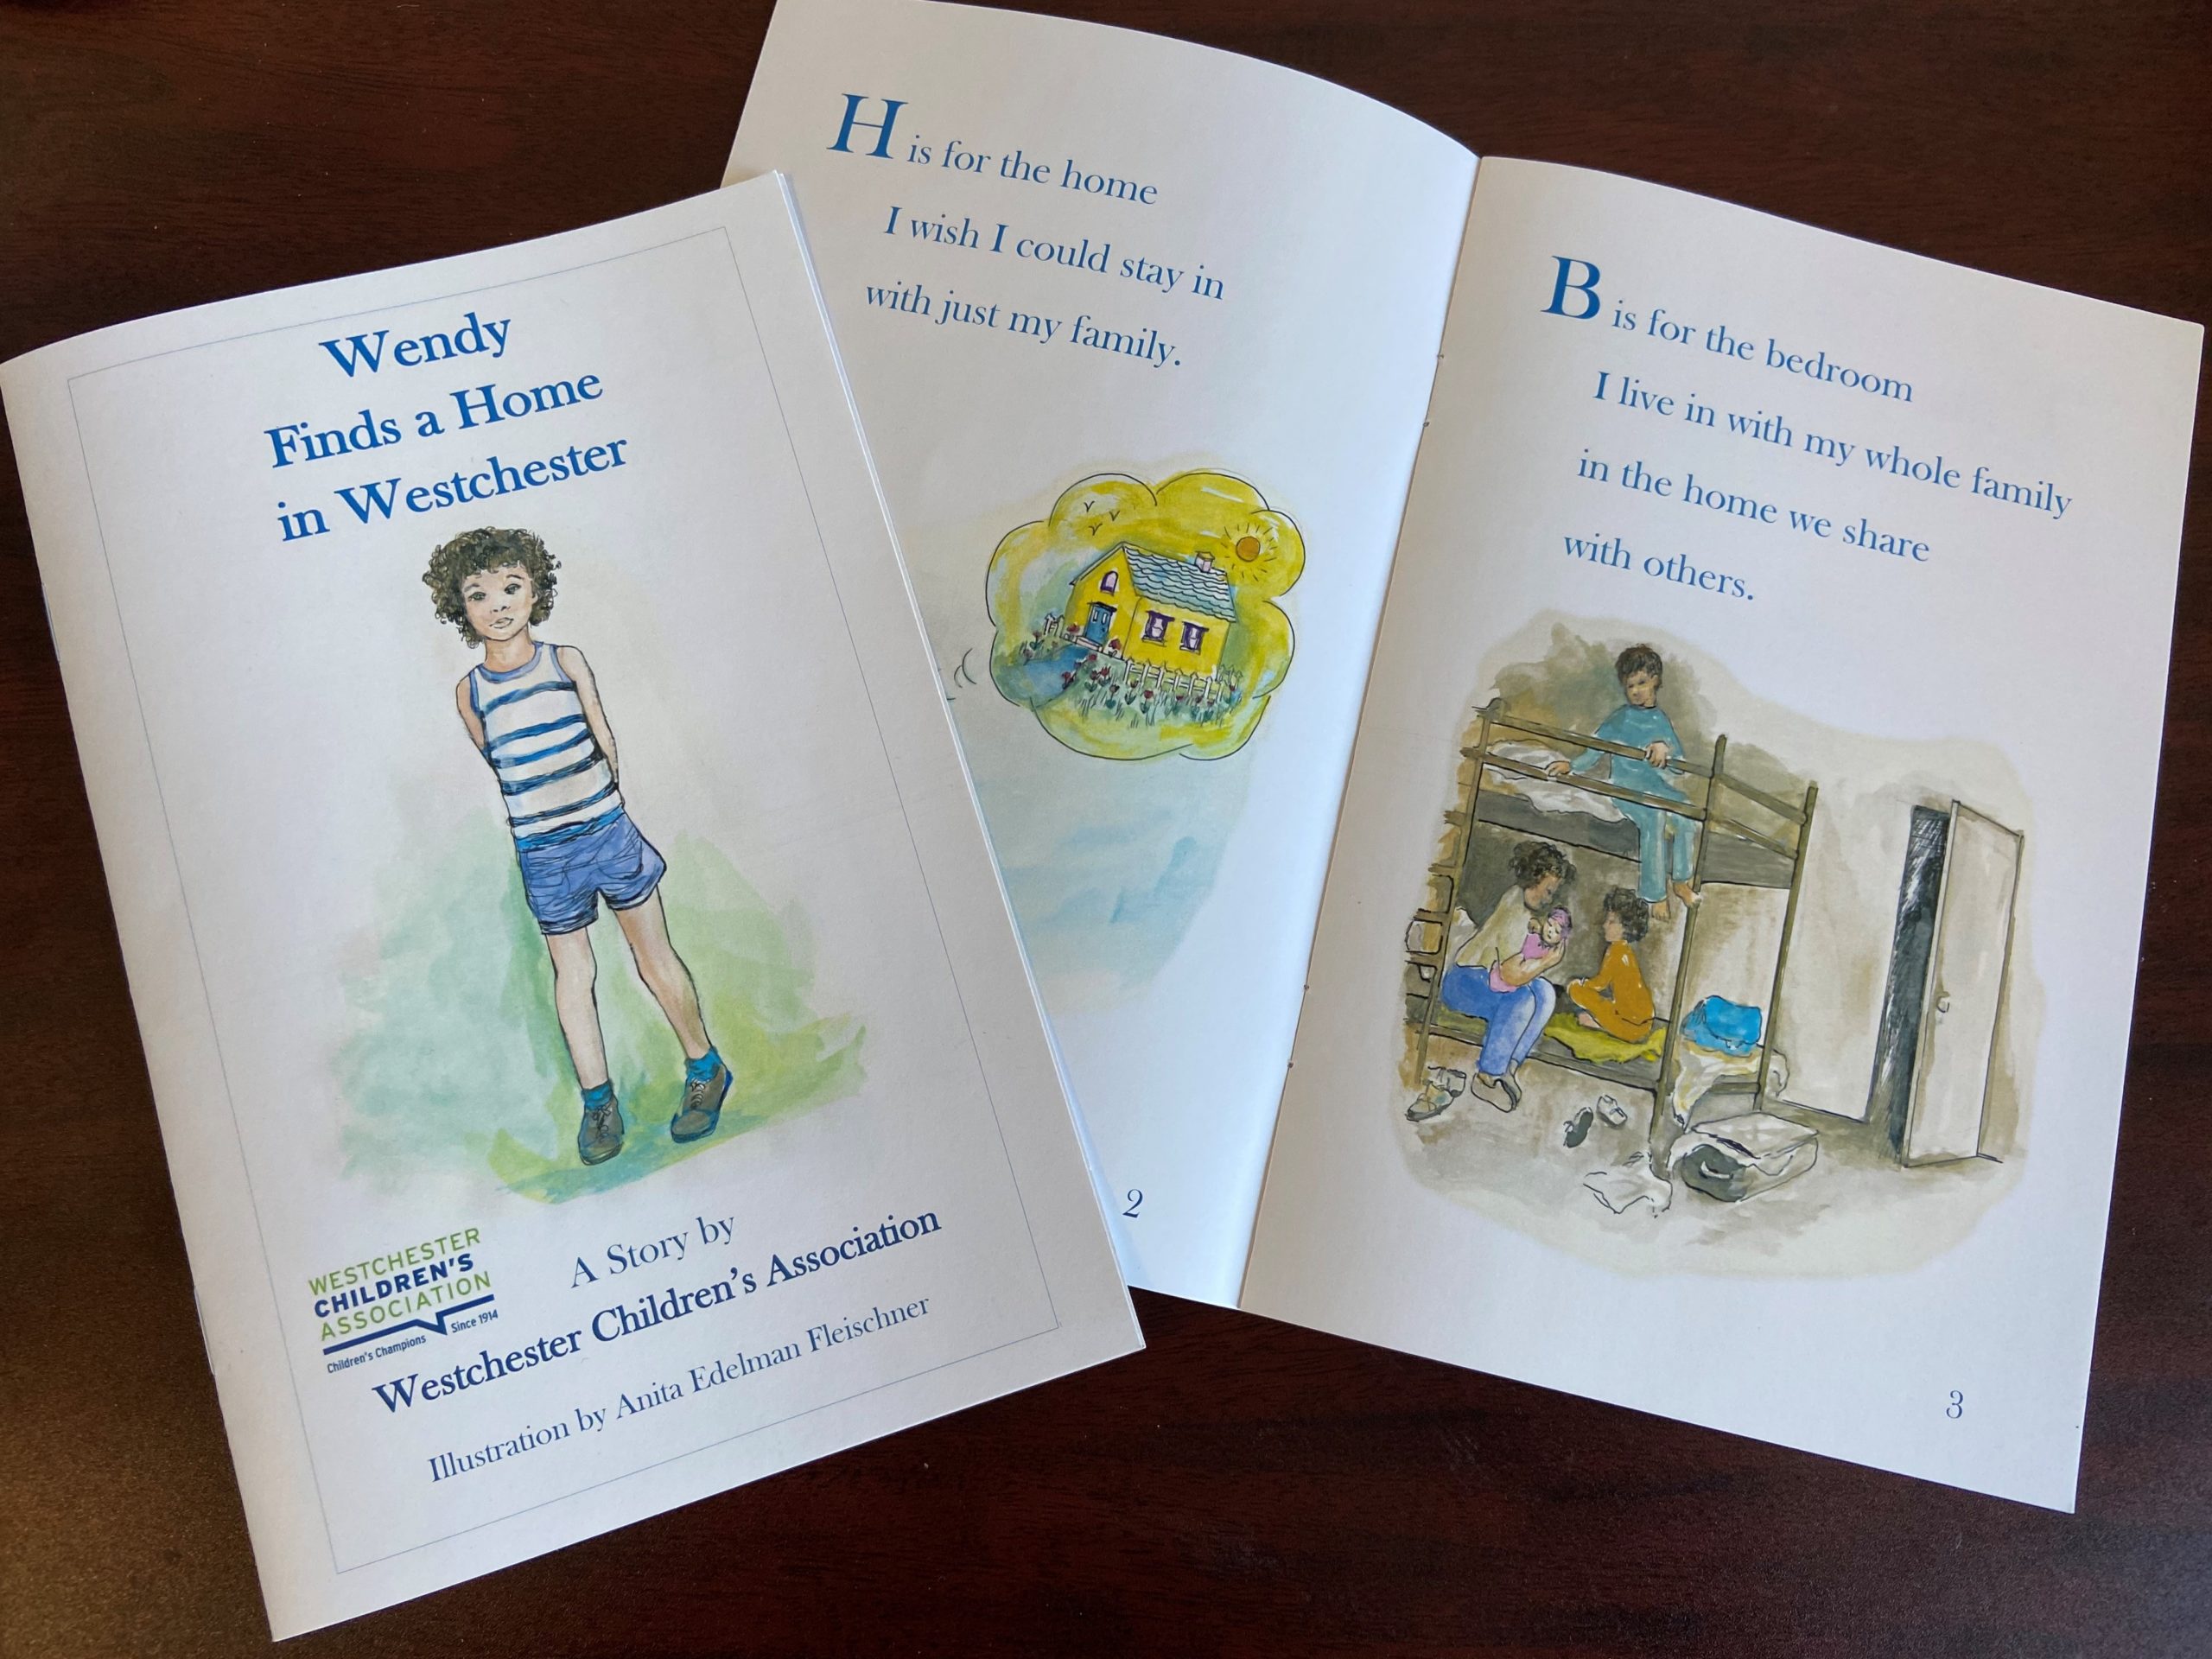 Slideshow of behind the scenes photos of WCA's first children's book on homelessness